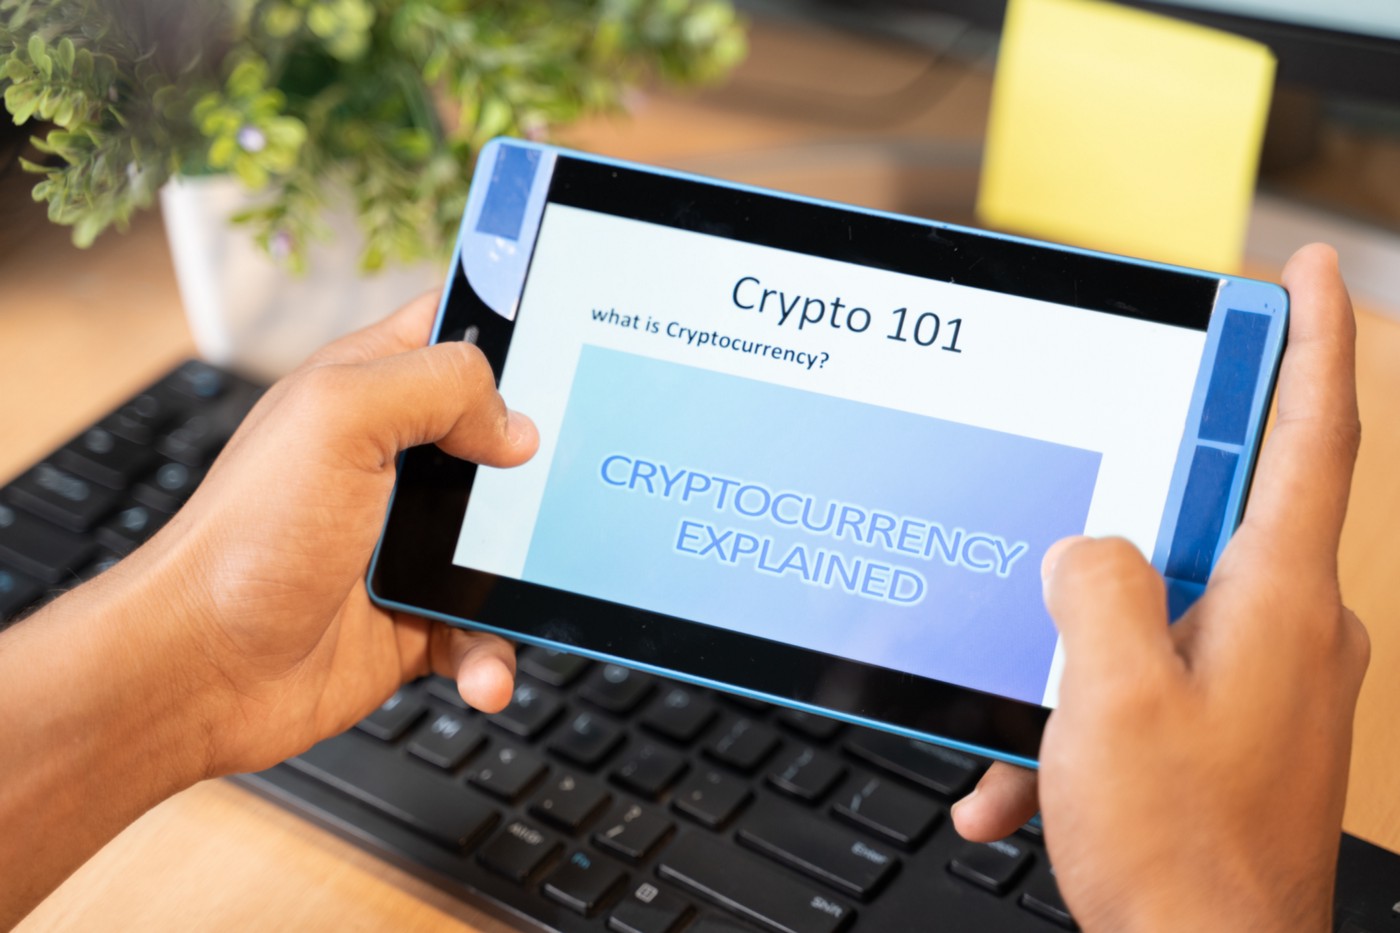 Shows someone holding a tablet with the words Crypto 101 & Cryptocurrency Explained.